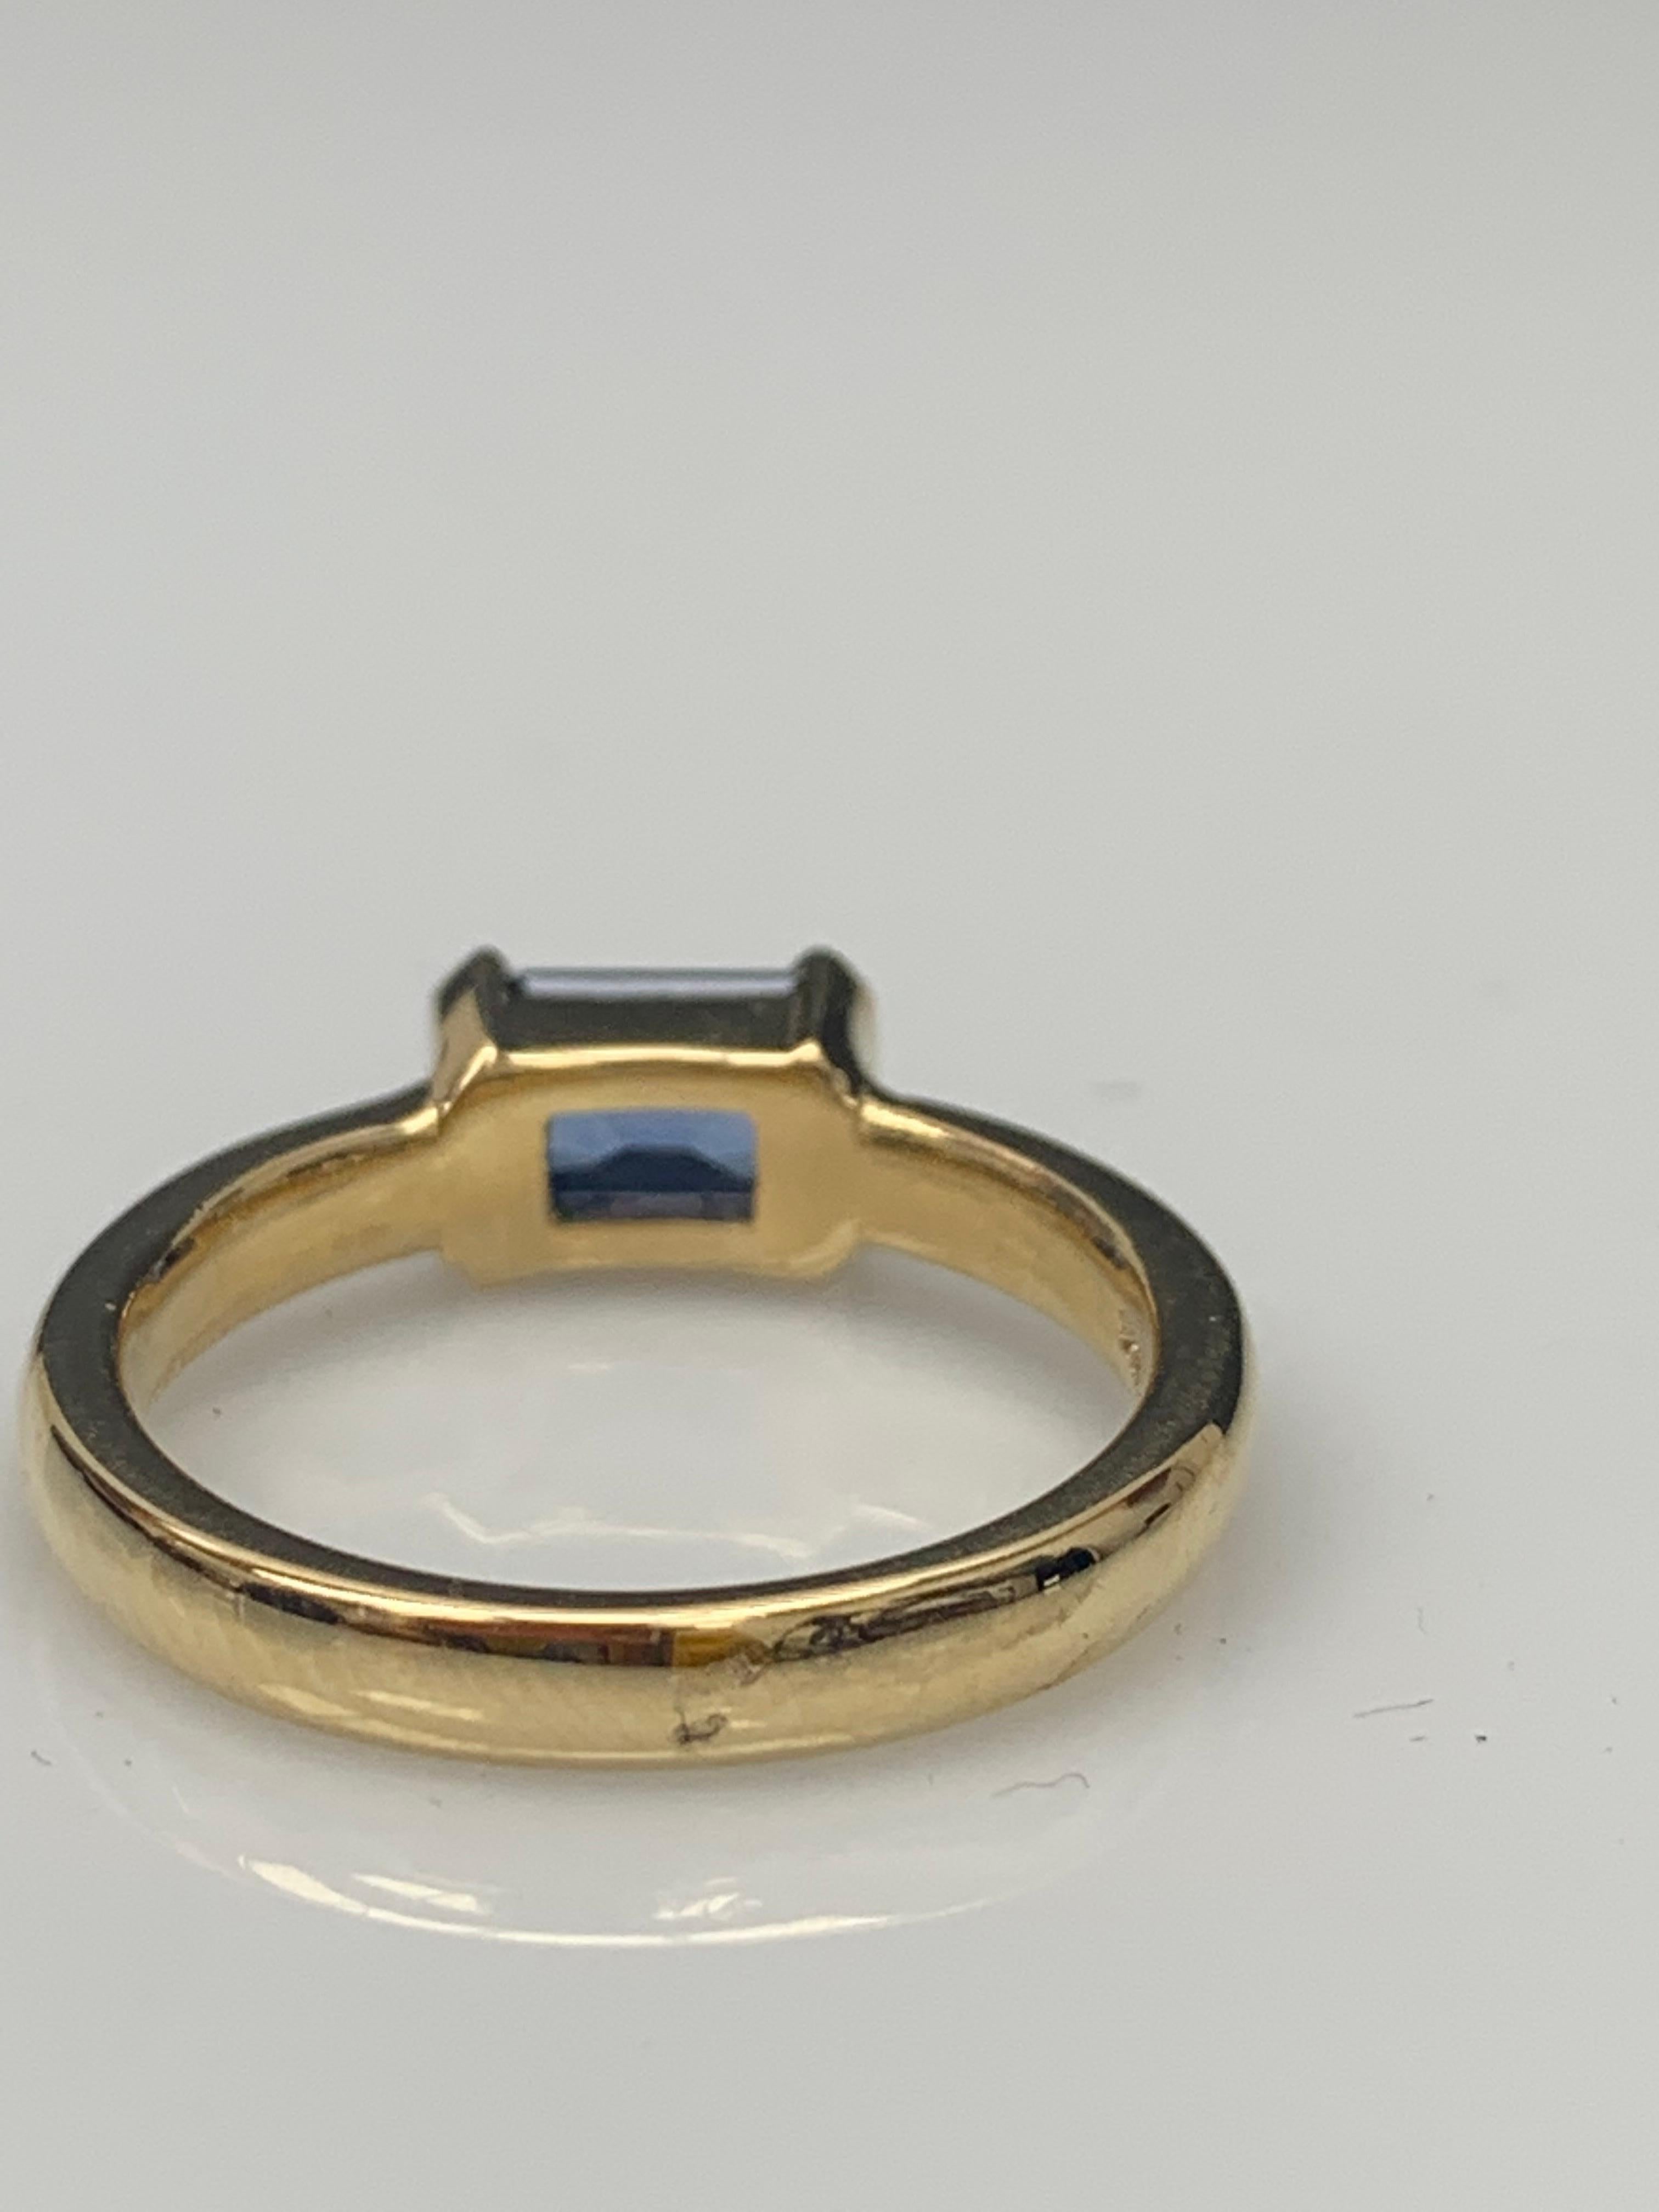 1.06 Carat Emerald Cut Blue Sapphire Band Ring in 14K Yellow Gold For Sale 6